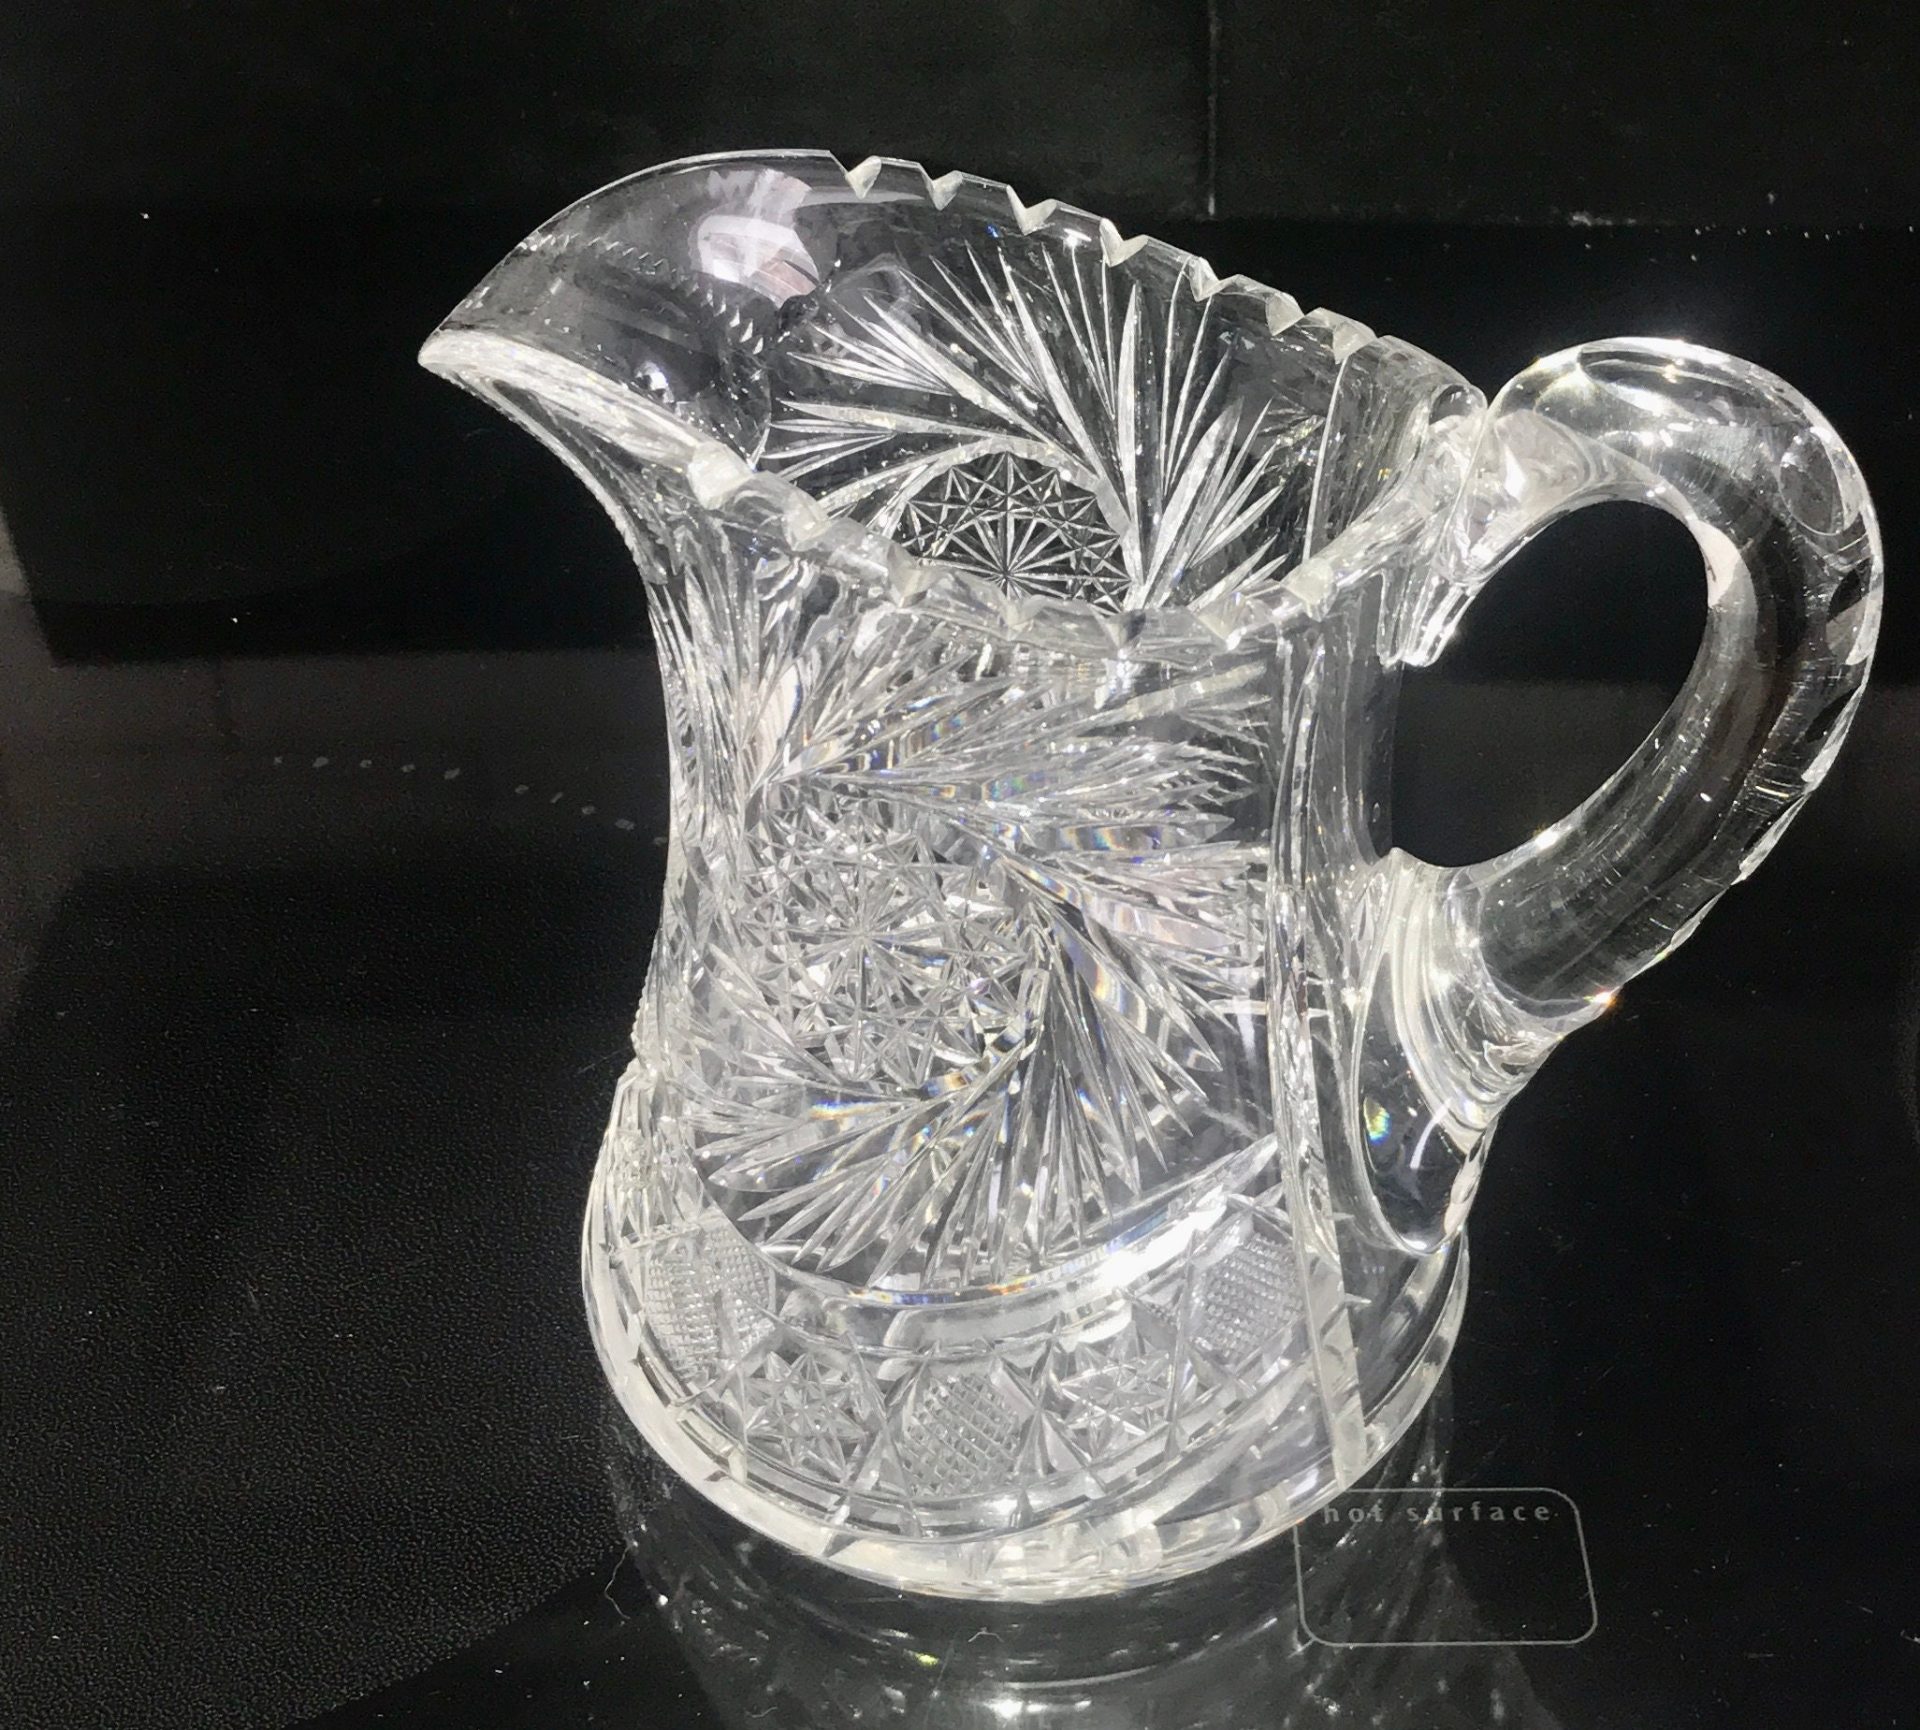 https://www.truevintageantiques.com/wp-content/uploads/2022/05/antique-american-brilliant-cut-crystal-pitcher-beautiful-large-cut-rim-and-handle-mint-condition-7-1-4-tall-collectible-display-elegant-629176762-scaled.jpg